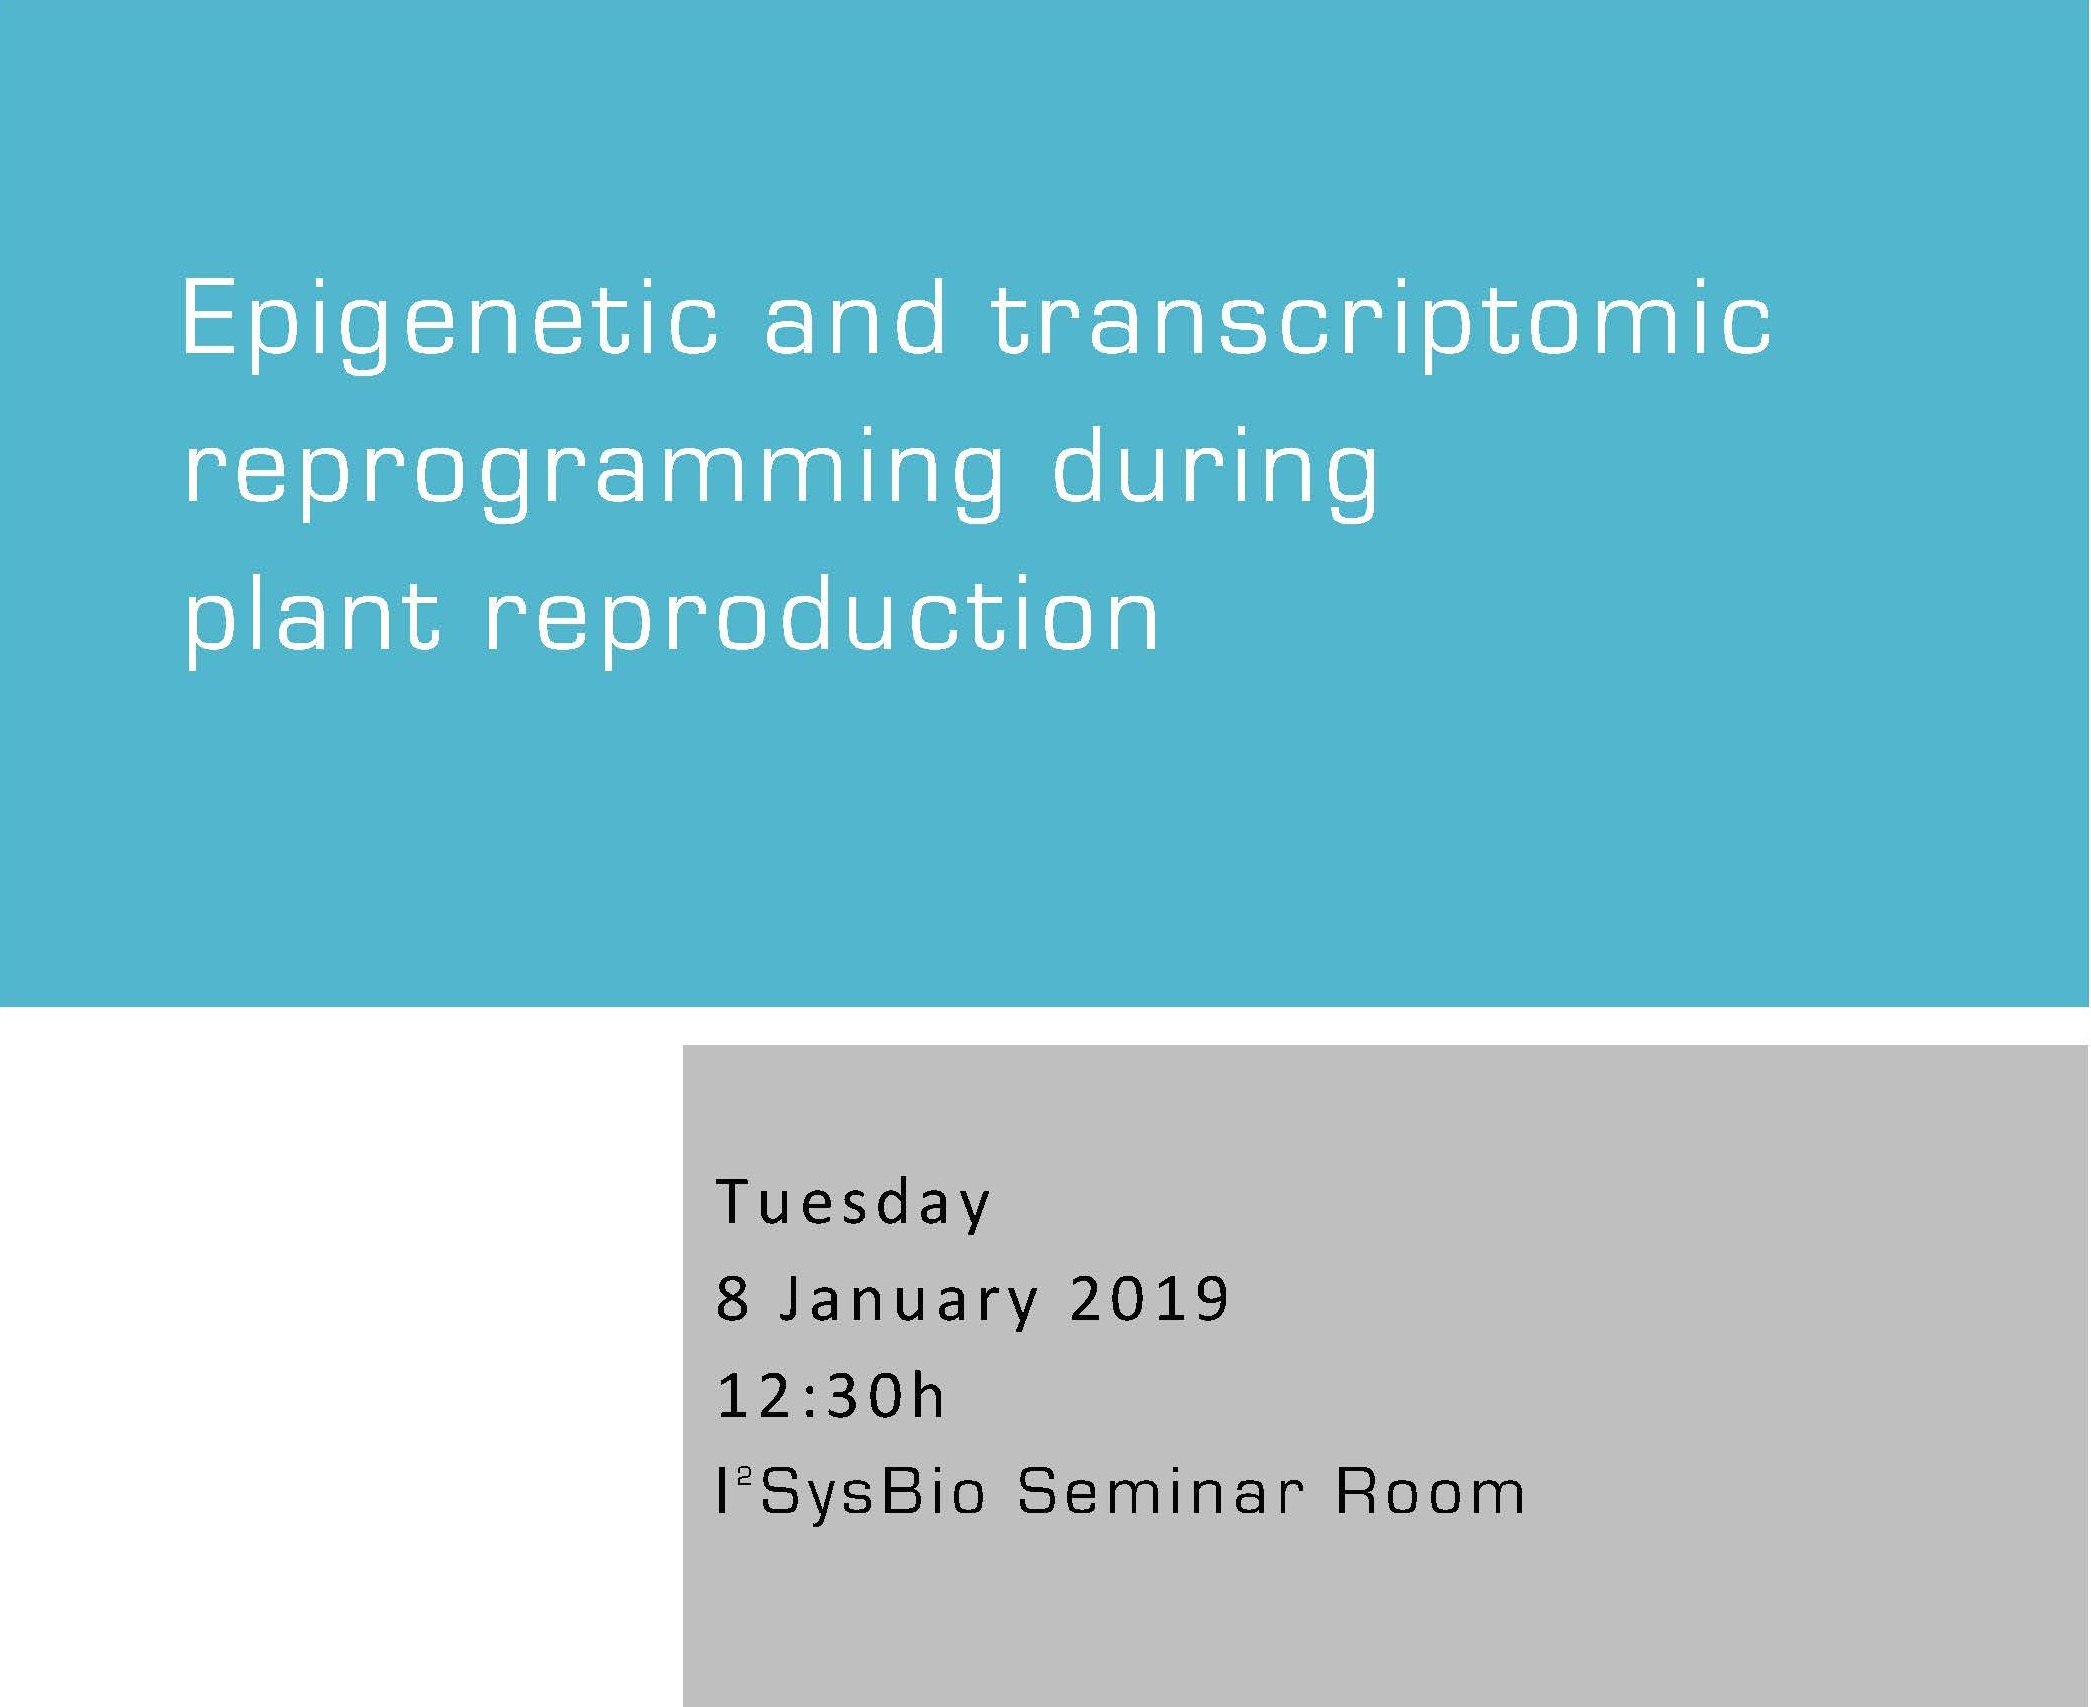 Epigenetic and transcriptomic reprogramming during plant reproduction